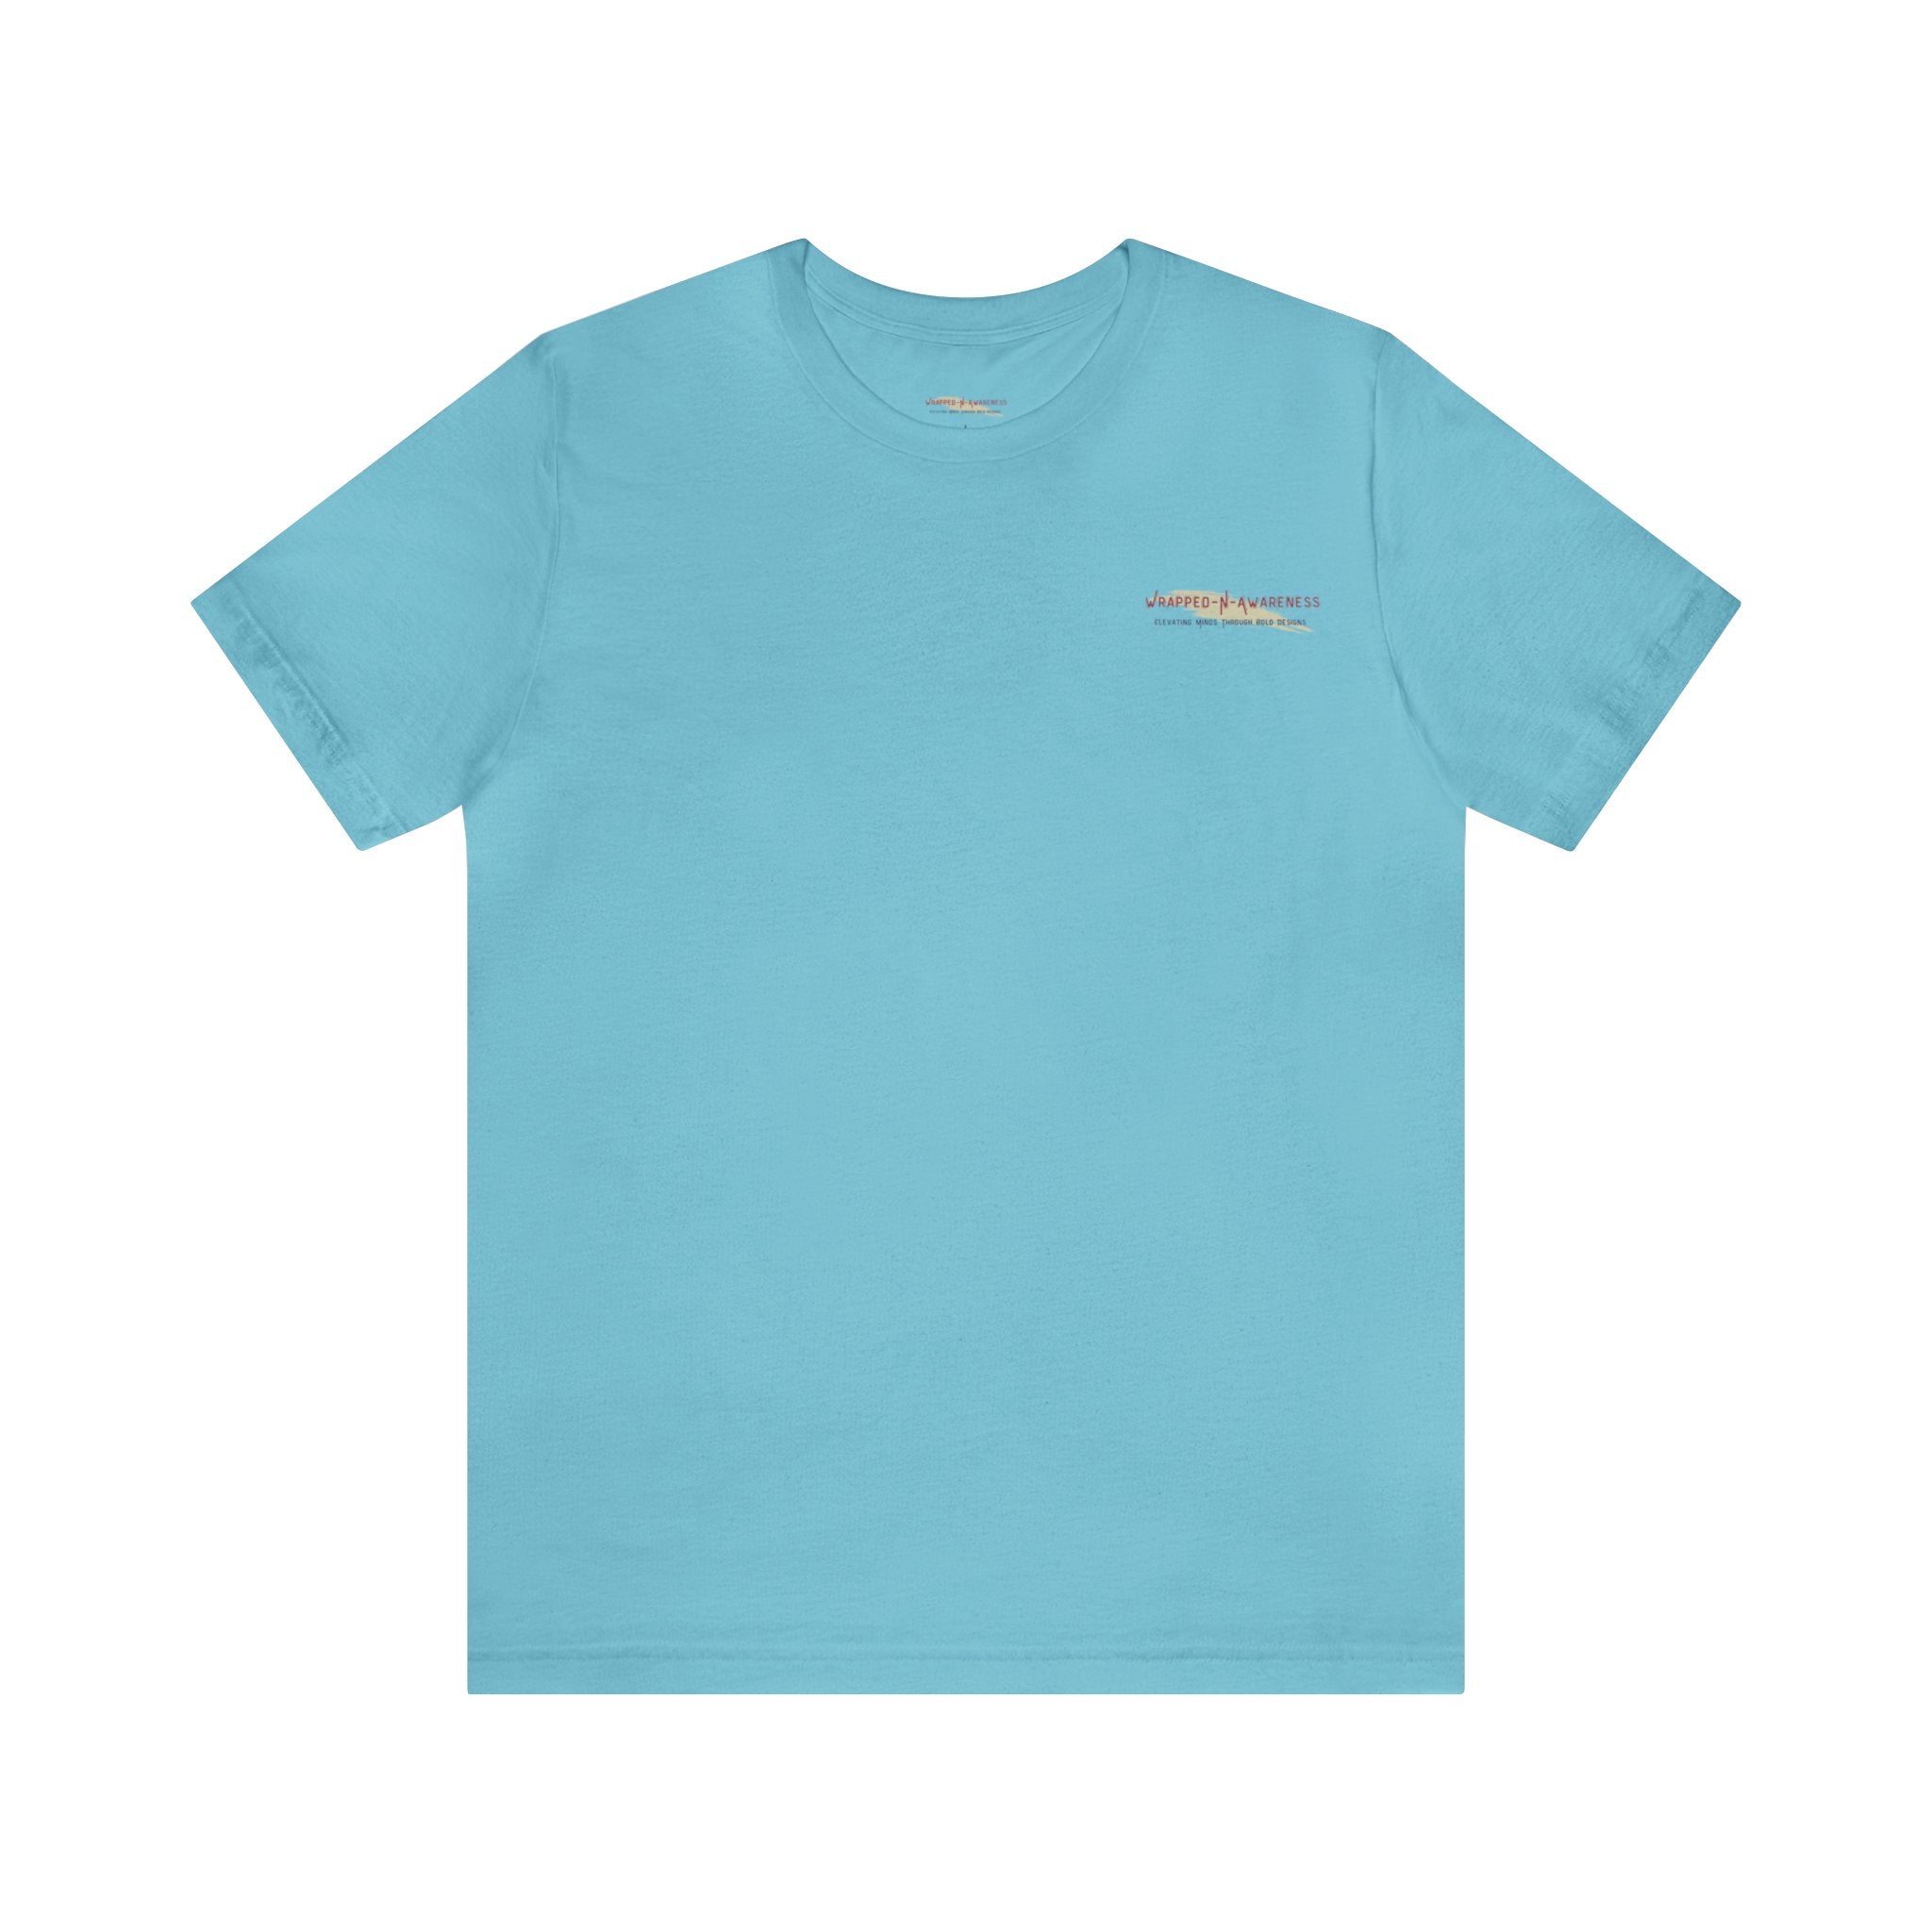 Hope Conquers Fear Jersey Tee - Bella+Canvas 3001 Heather Ice Blue Airlume Cotton Bella+Canvas 3001 Crew Neckline Jersey Short Sleeve Lightweight Fabric Mental Health Support Retail Fit Tear-away Label Tee Unisex Tee T-Shirt 14887987408286874211_2048 Printify